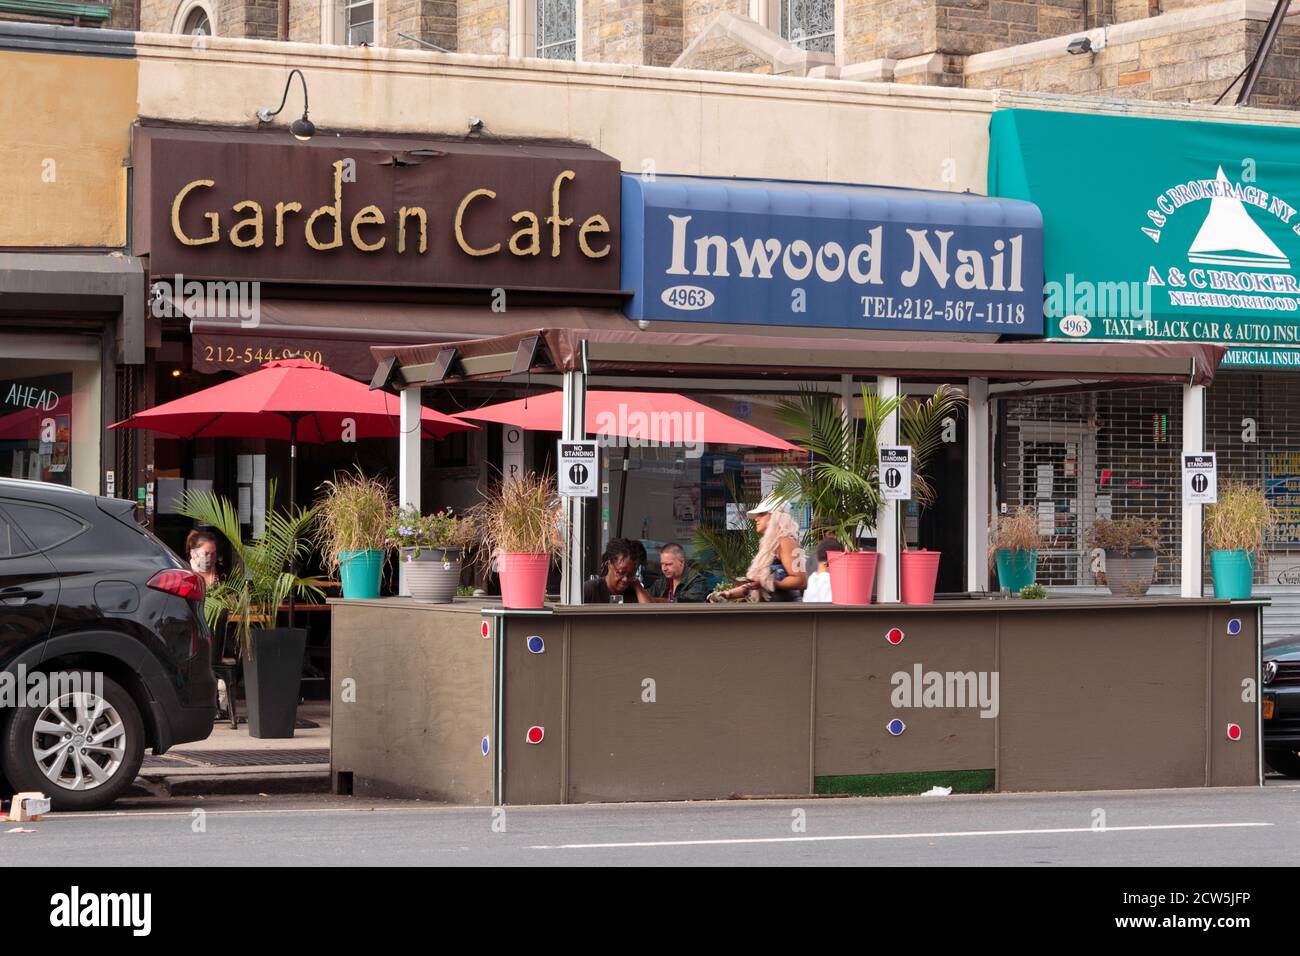 a dining booth in the street set up by the Garden Cafe restaurant in Inwood to comply with covid-19 or coronavirus regulations in nyc Stock Photo